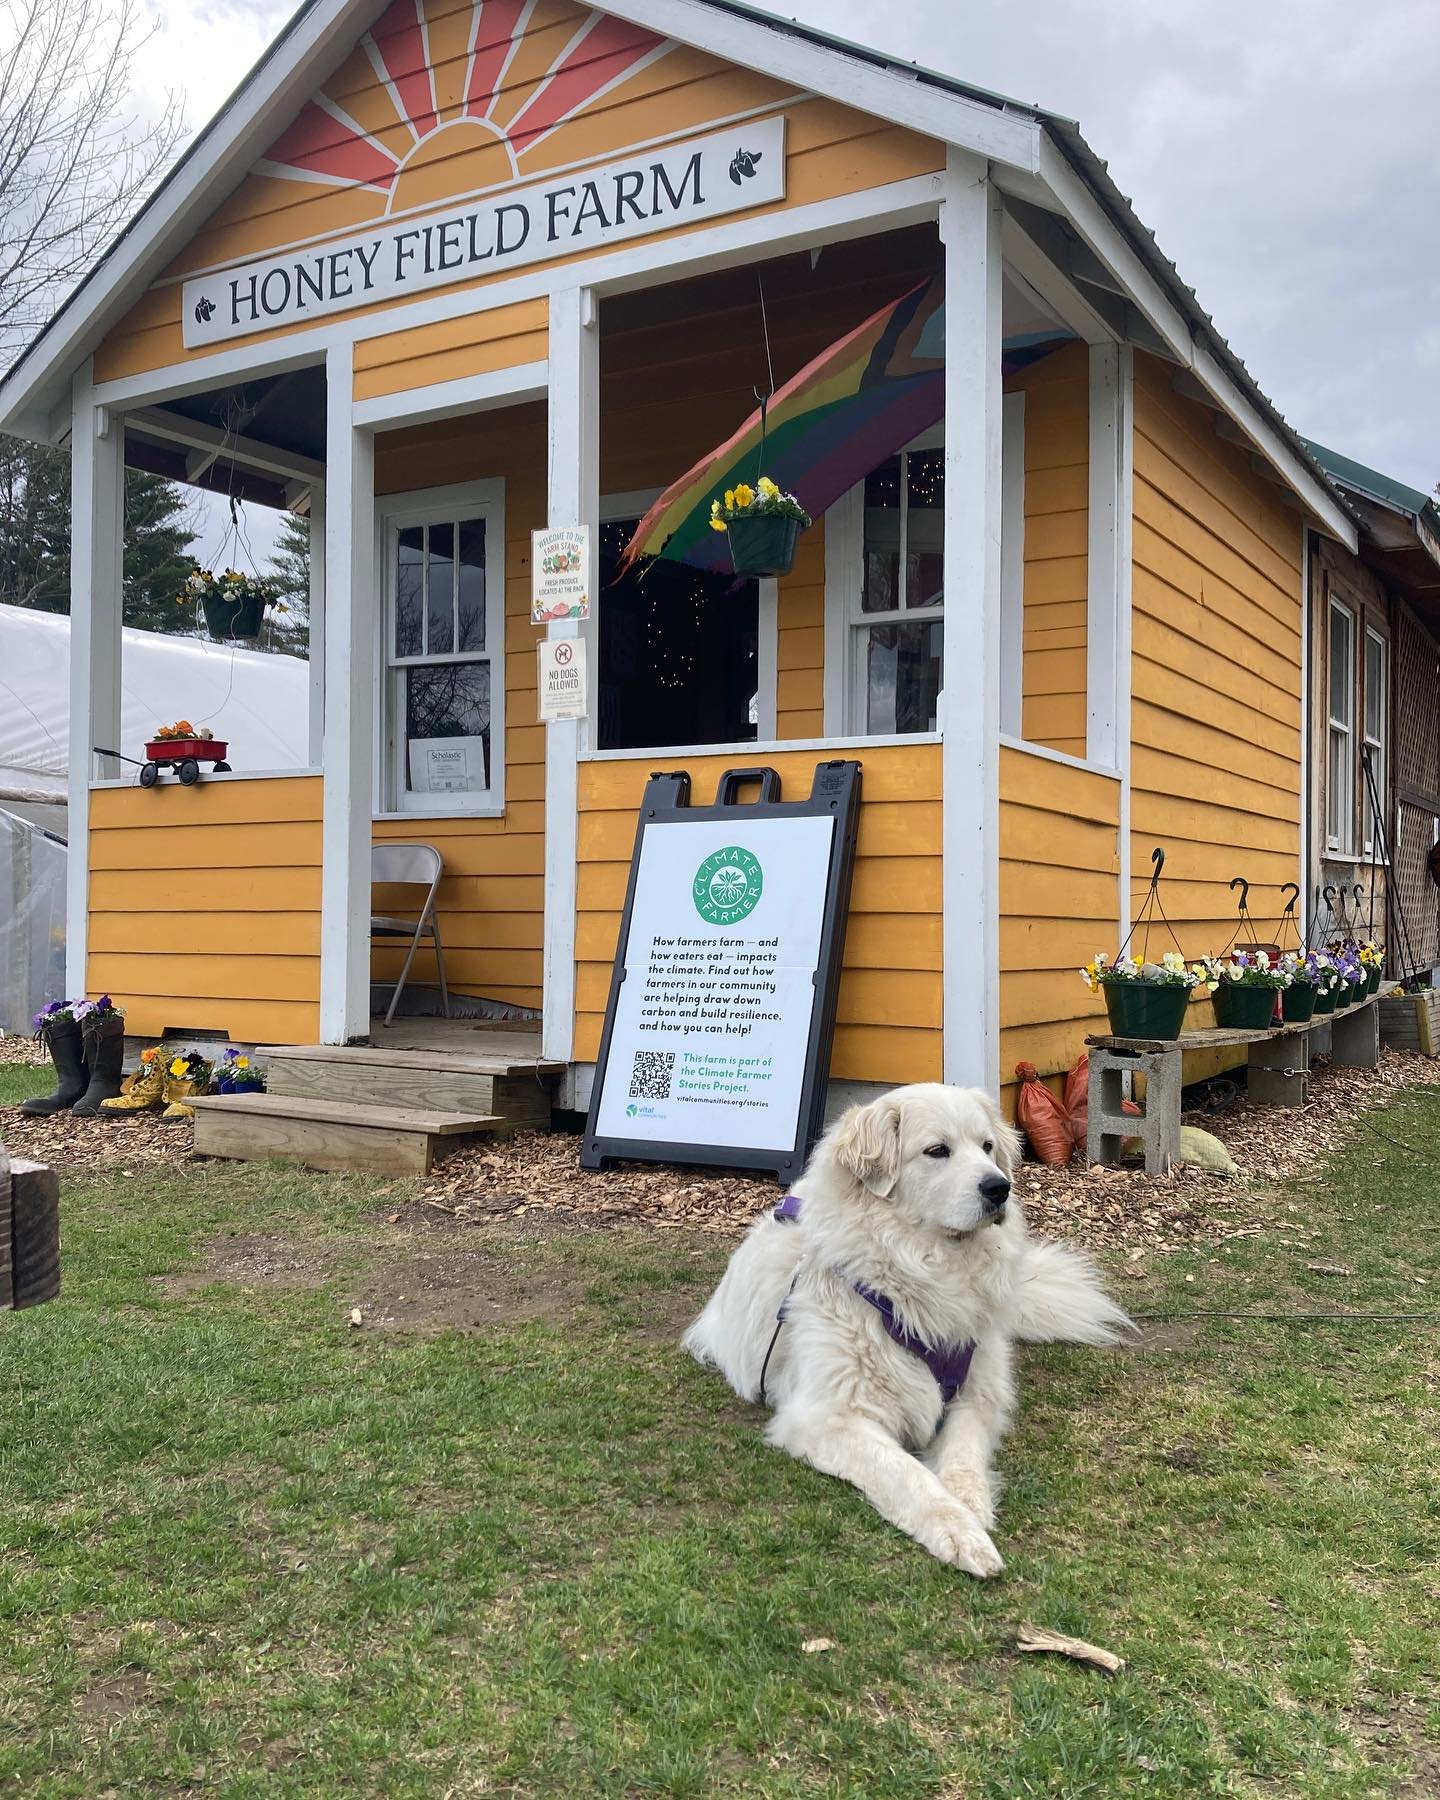 Luna is ready for her meet &amp; greet! Come by between 2-4 for fluffy hugs and kisses. It&rsquo;s chilly out but Luna can warm you up! Thank you @meganlbaxter for her spa treatment - the birds appreciate it as much as we do! #farmdog #greatpyrenees